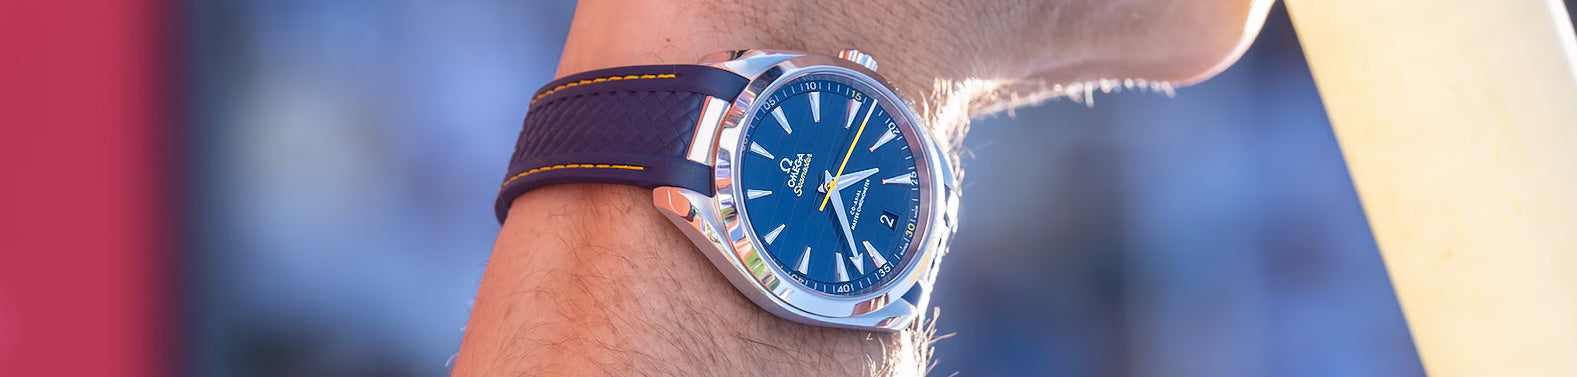 Omega Releases A Brand New Aqua Terra 150m Inspired By A World-Record Pole Vaulter